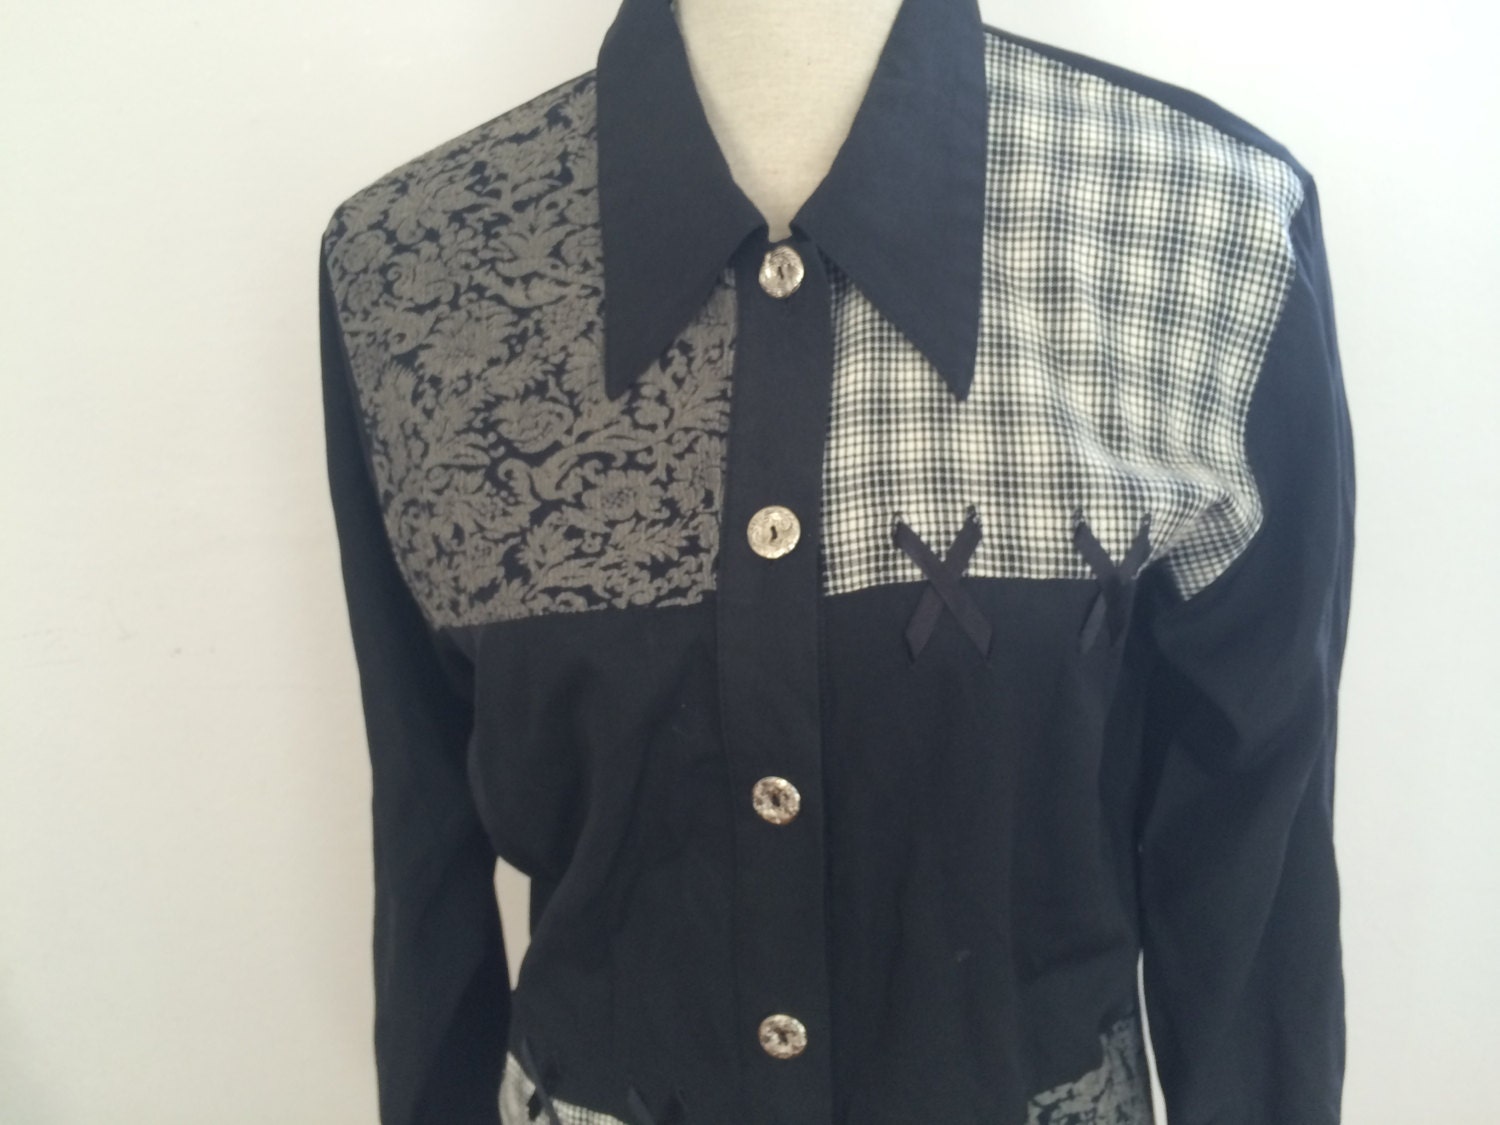 Black and white 70s/80s shirt 70s collar shirt colorblock